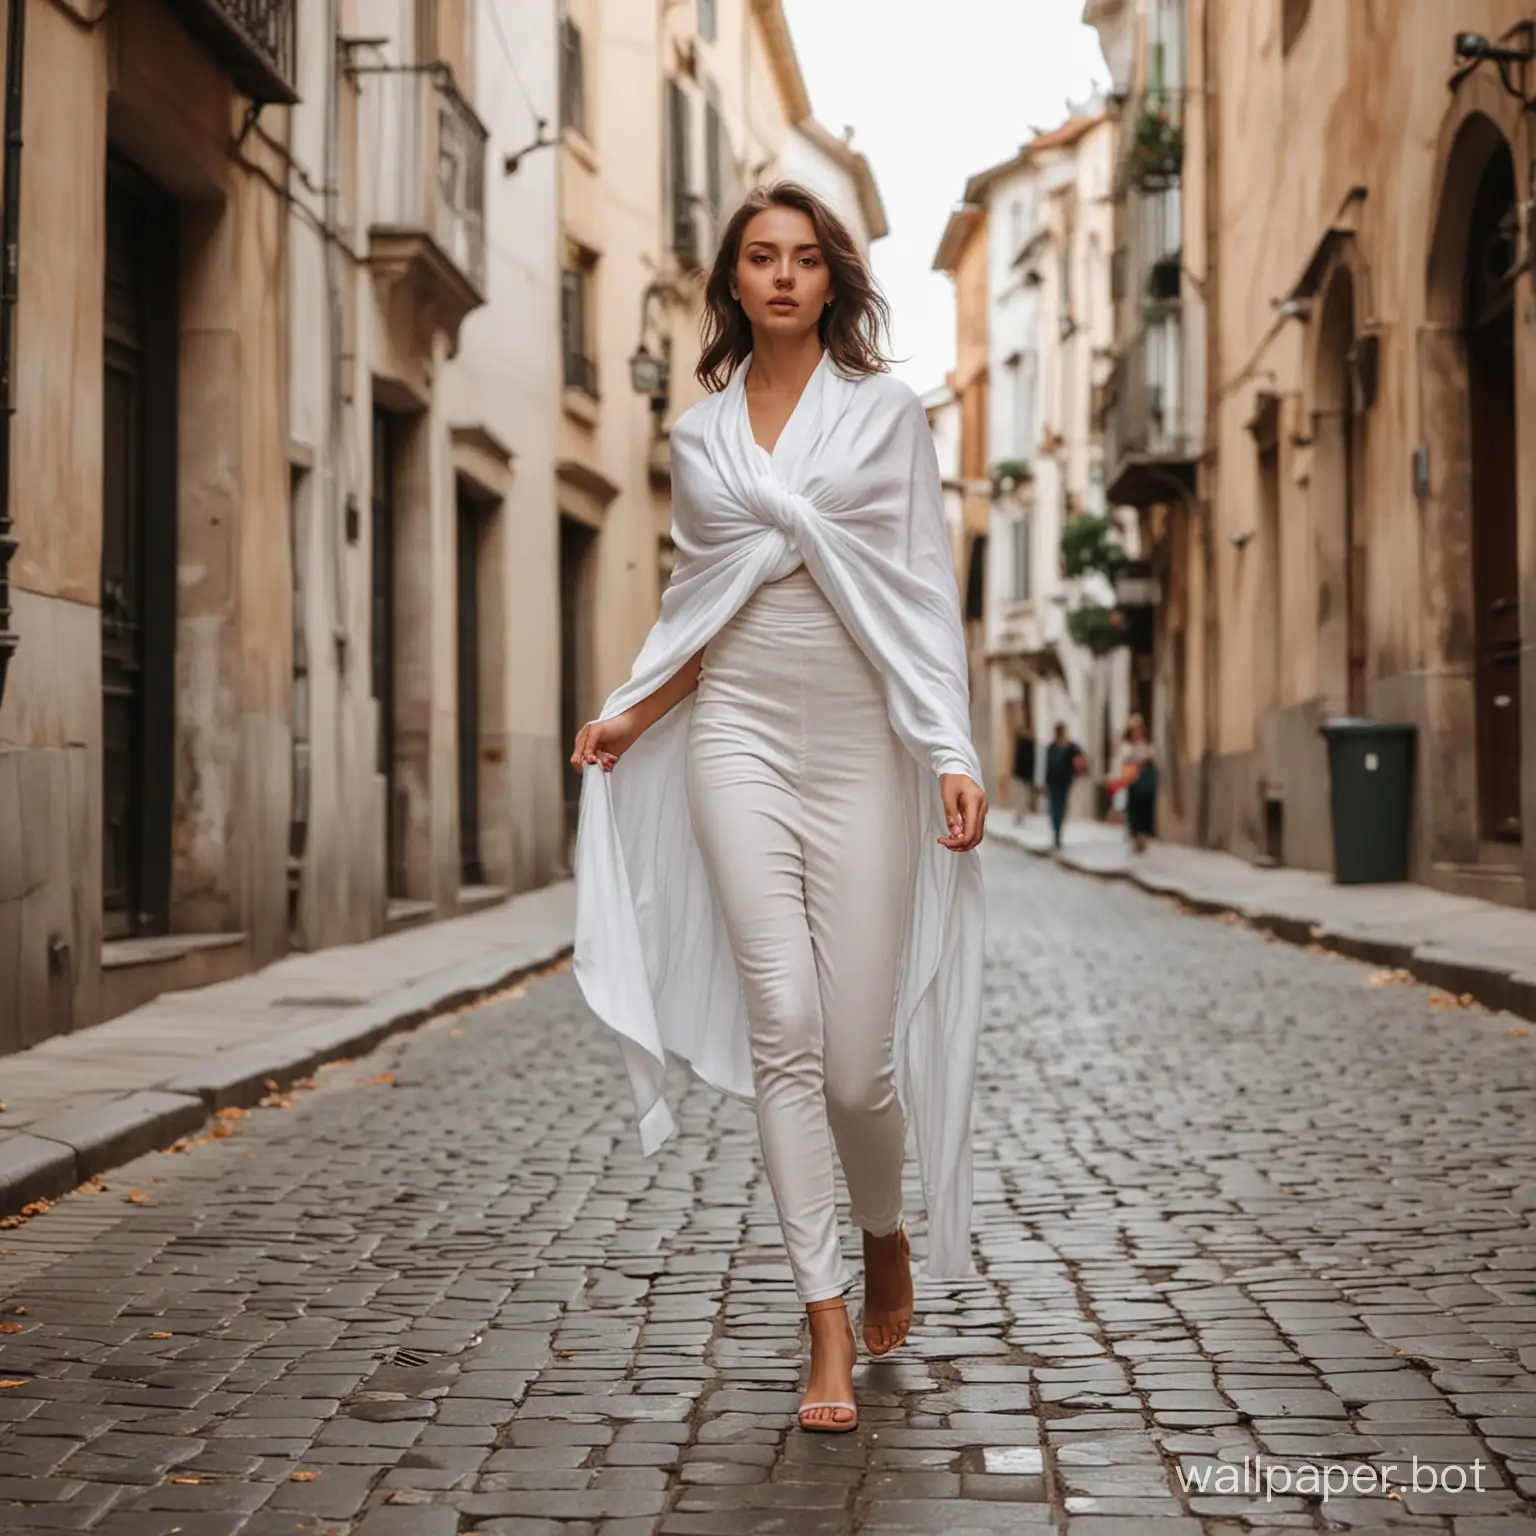 Full body girl draped with a white shawl walking down the city street